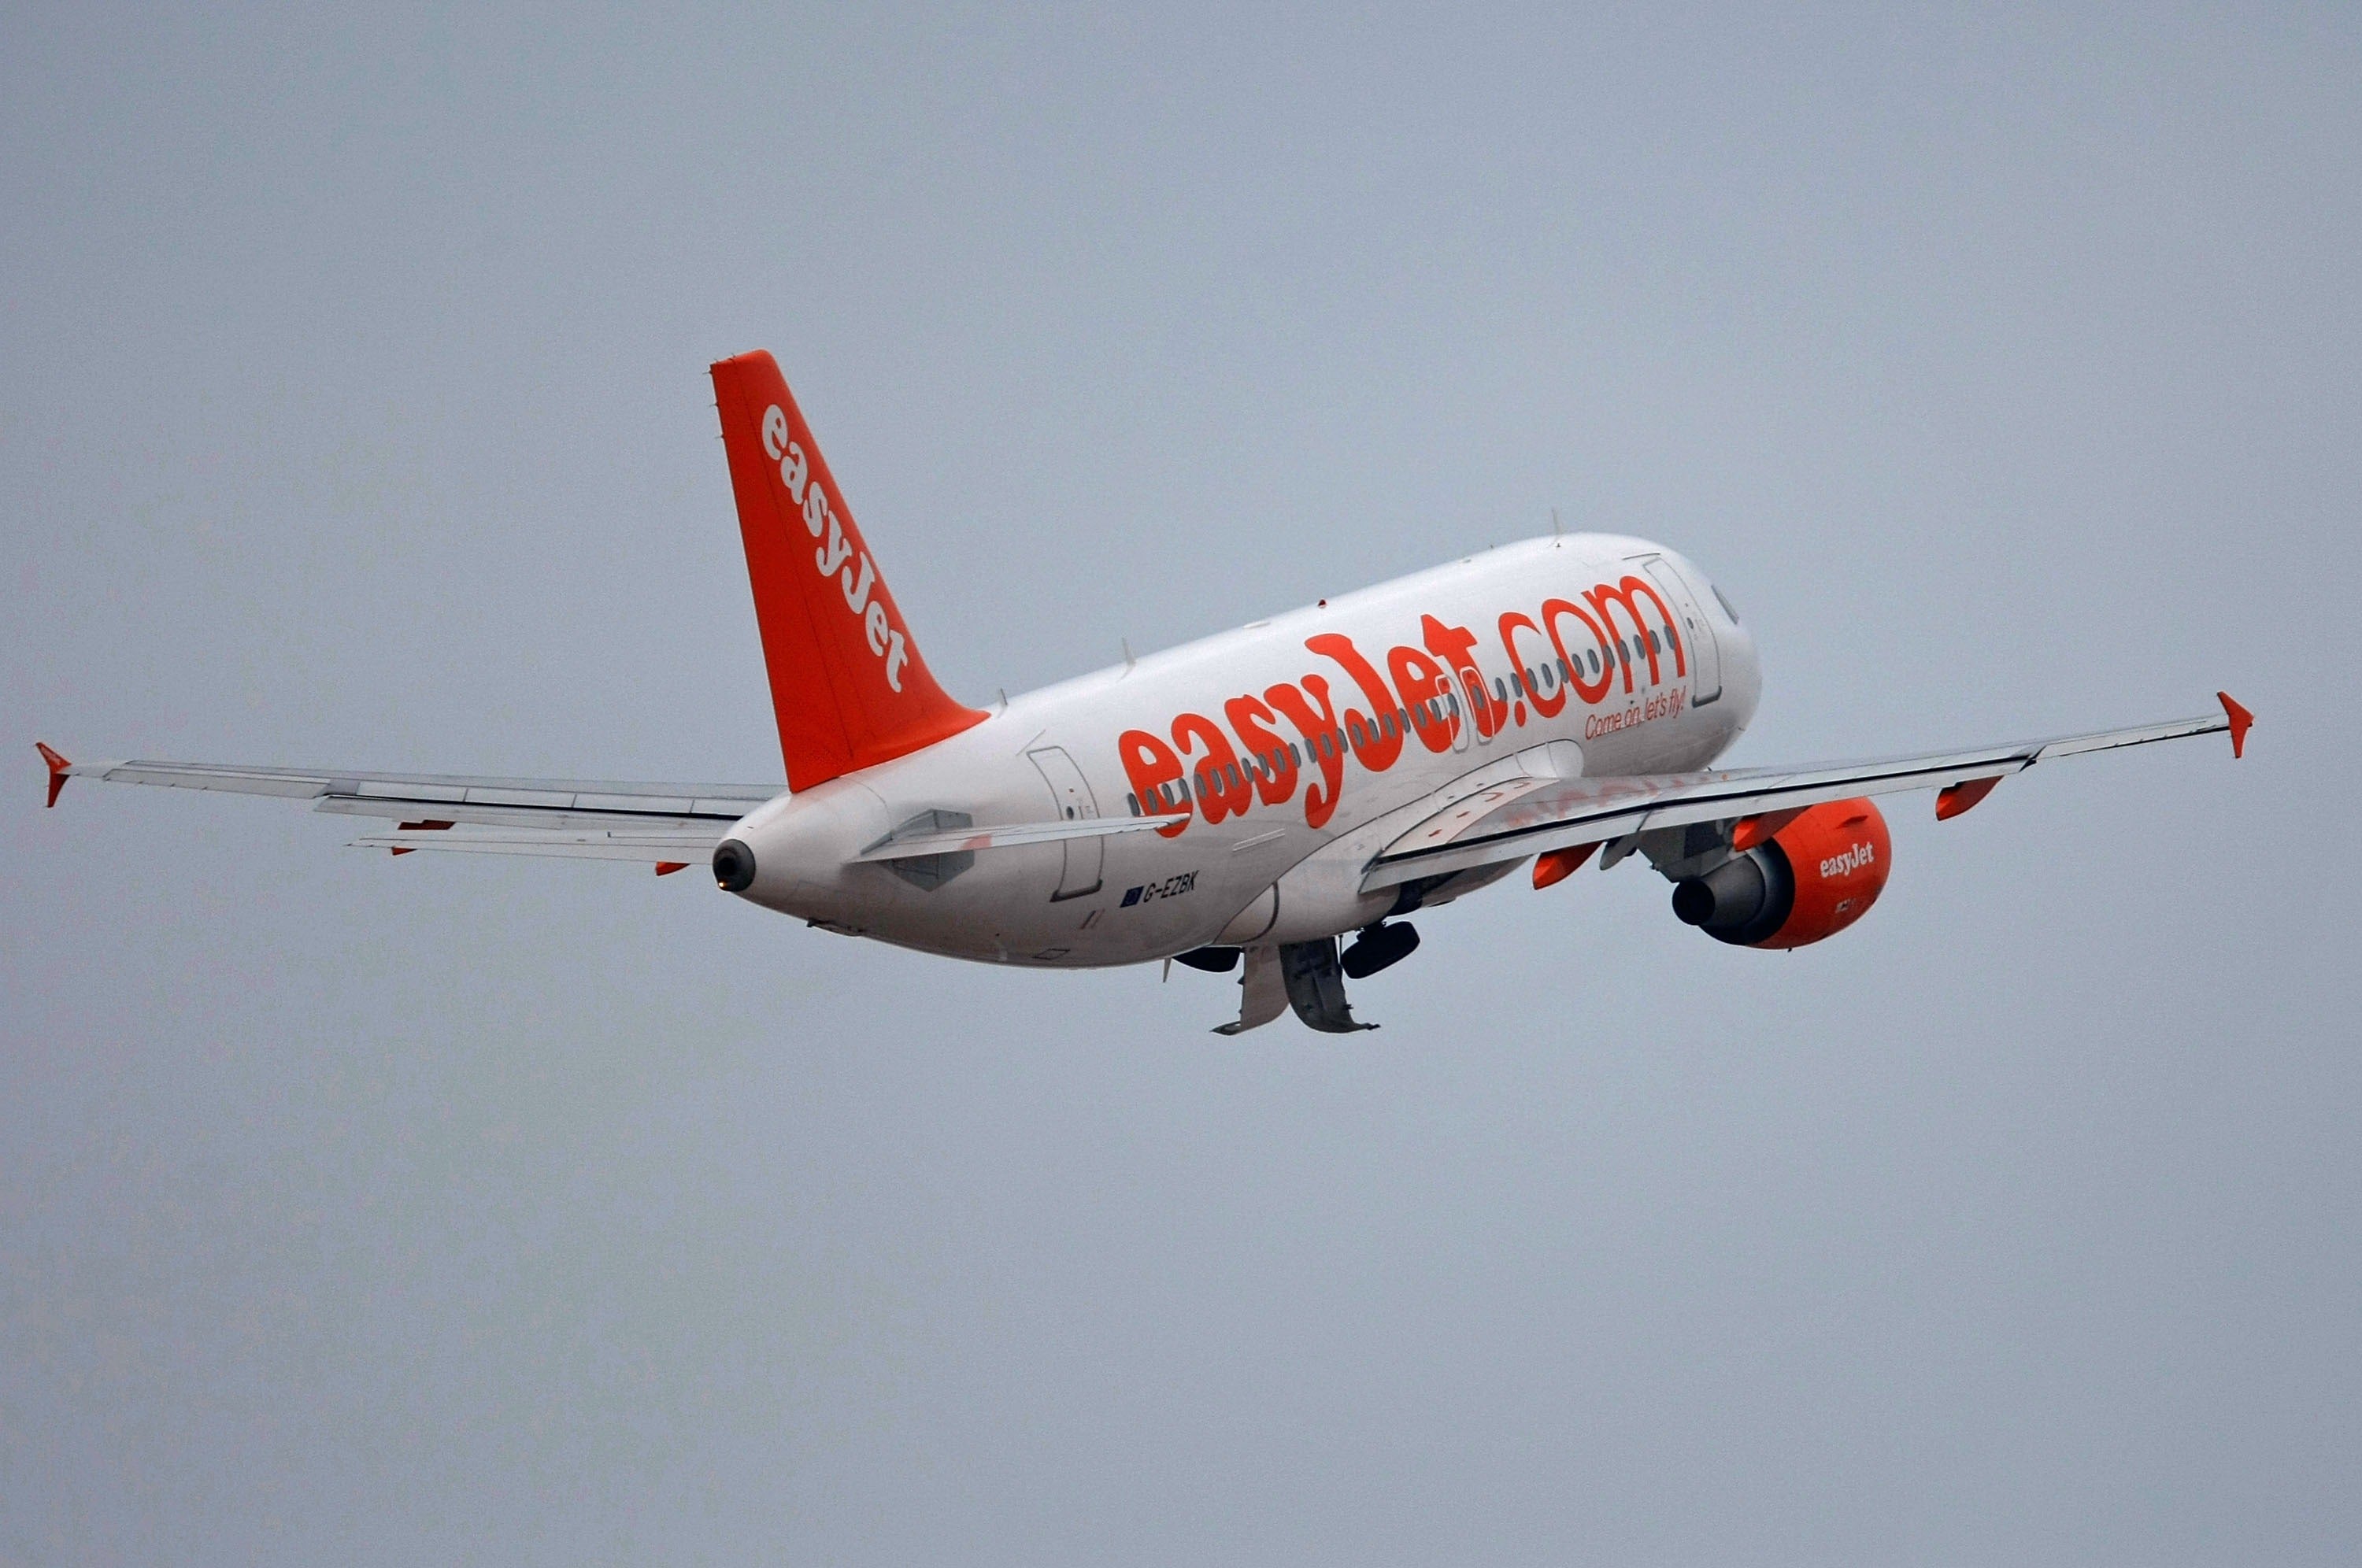 The easyJet plane was forced to land in Thessaloniki